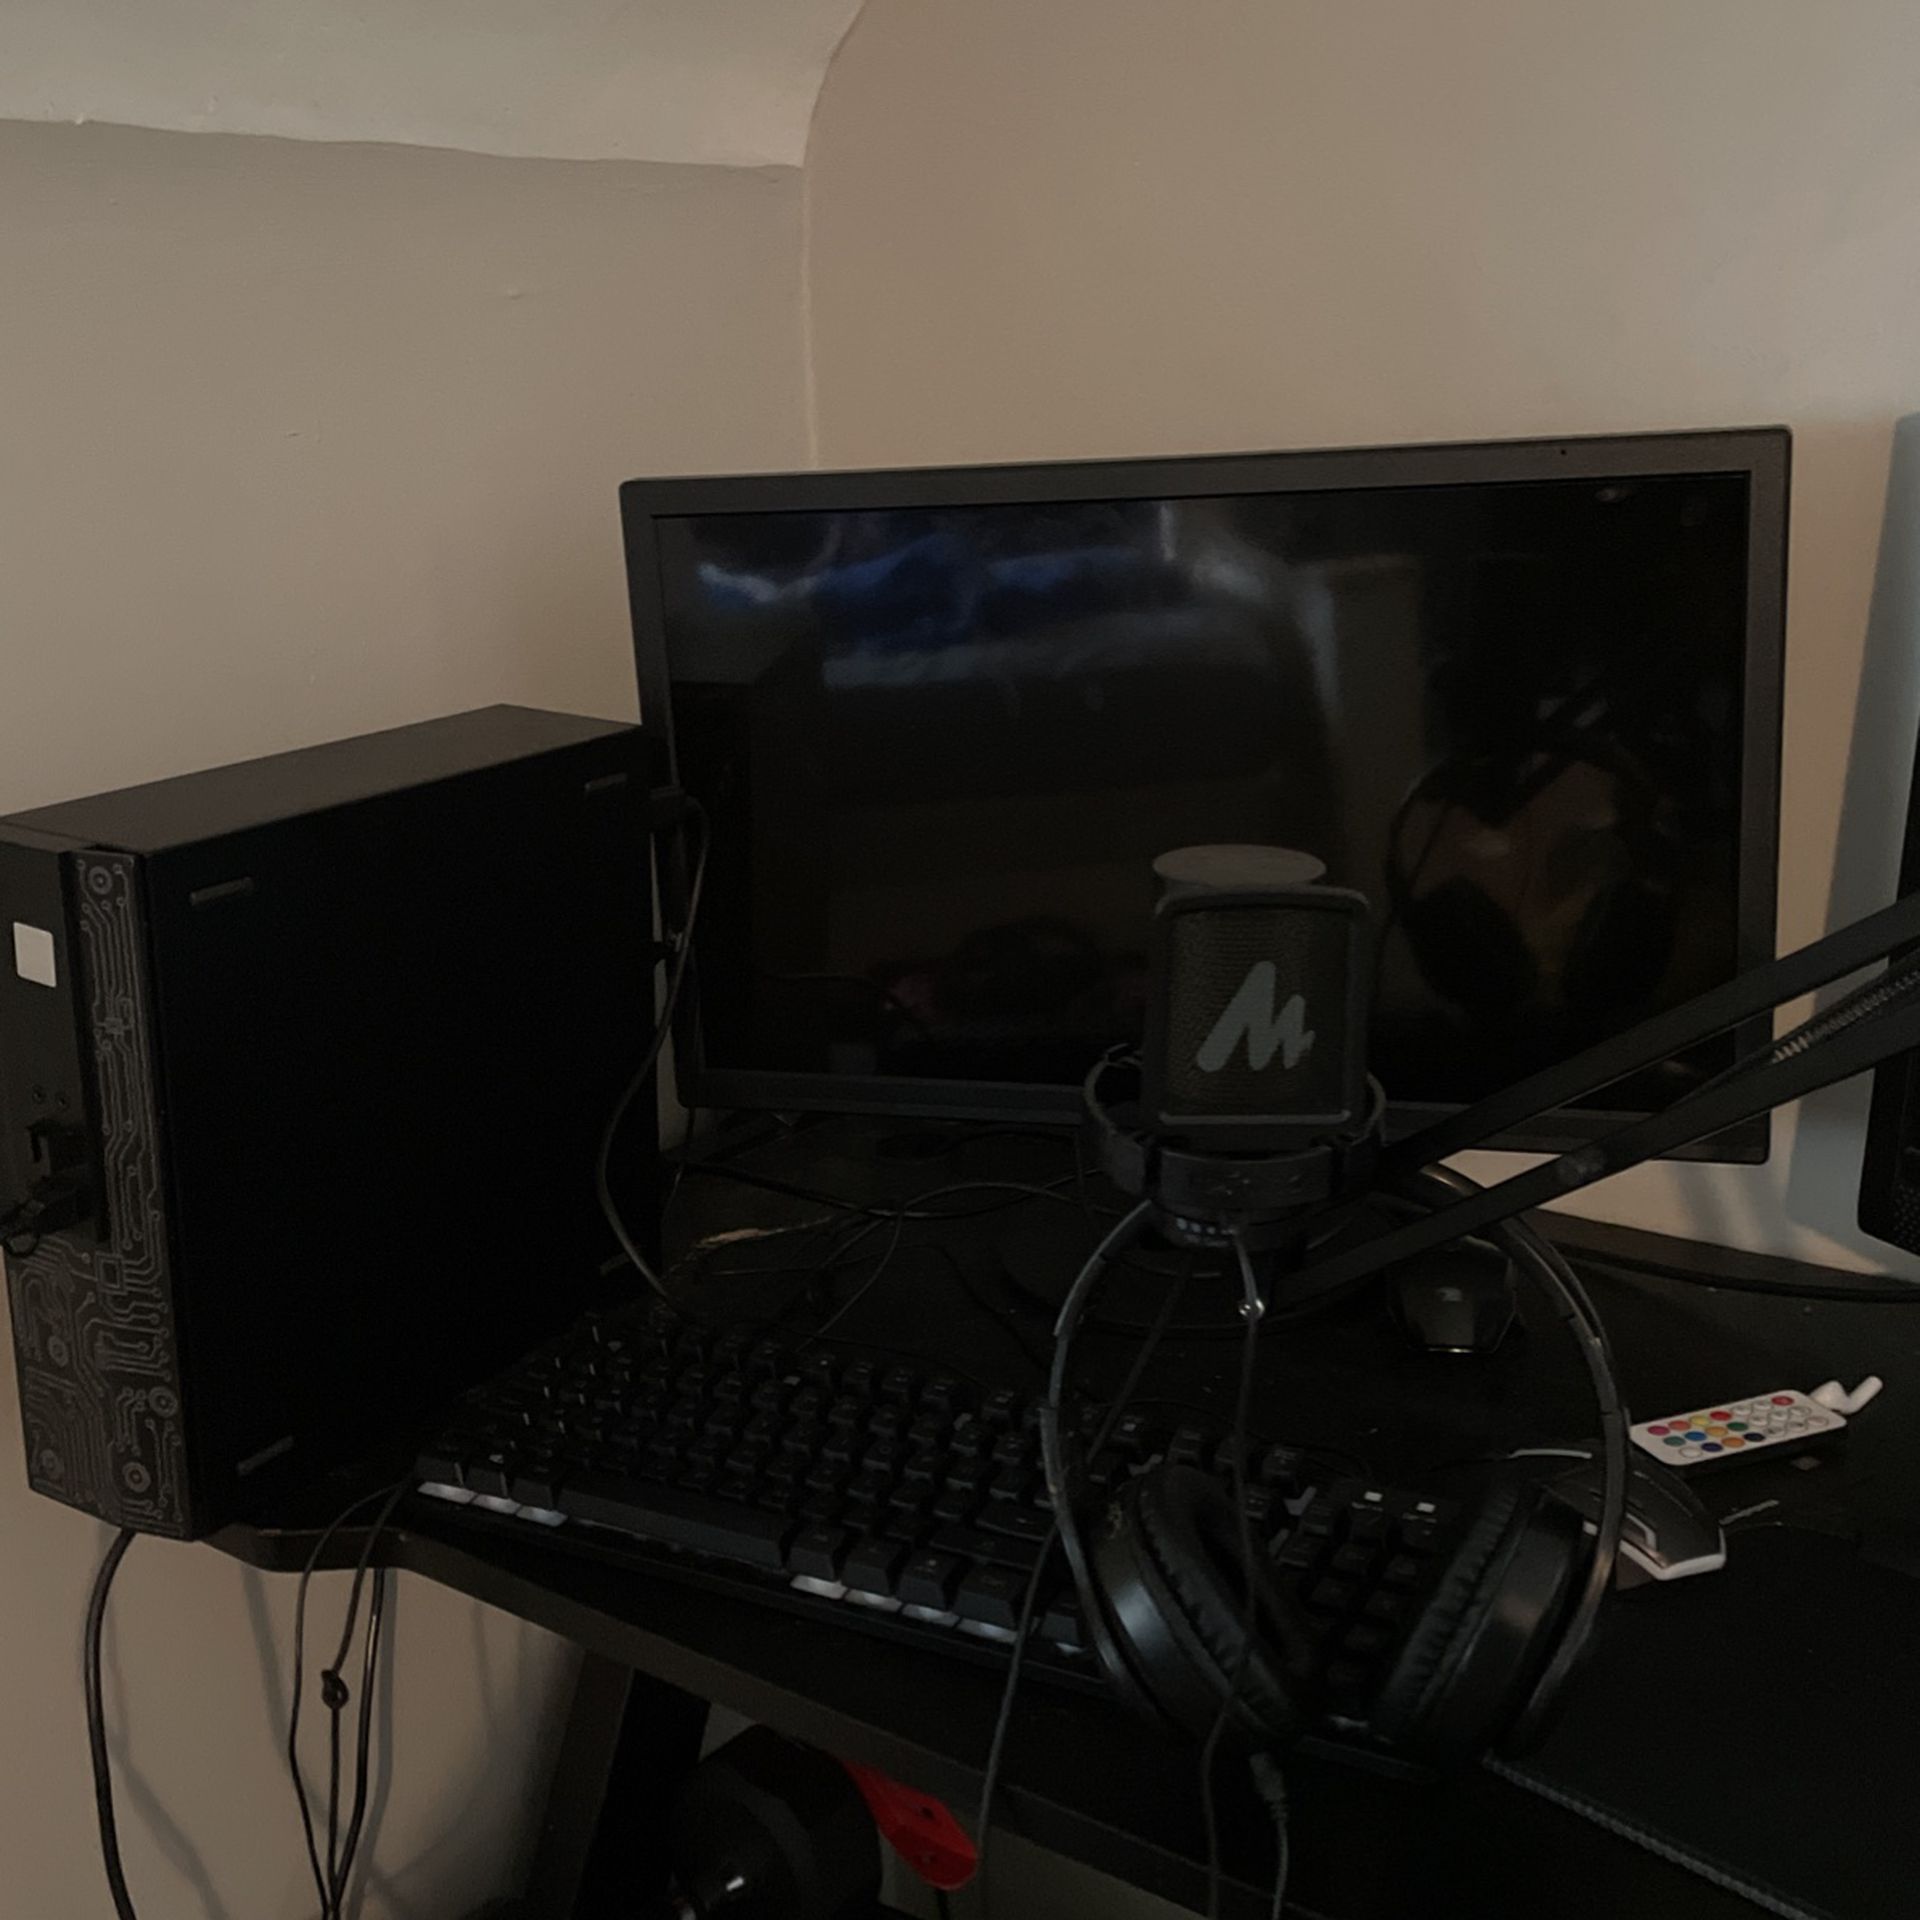 I Have A Gaming Pc Working Monitor Everything Is Good Brand New The Mic And Headphone And Mouse Pad Just Not There Desk 